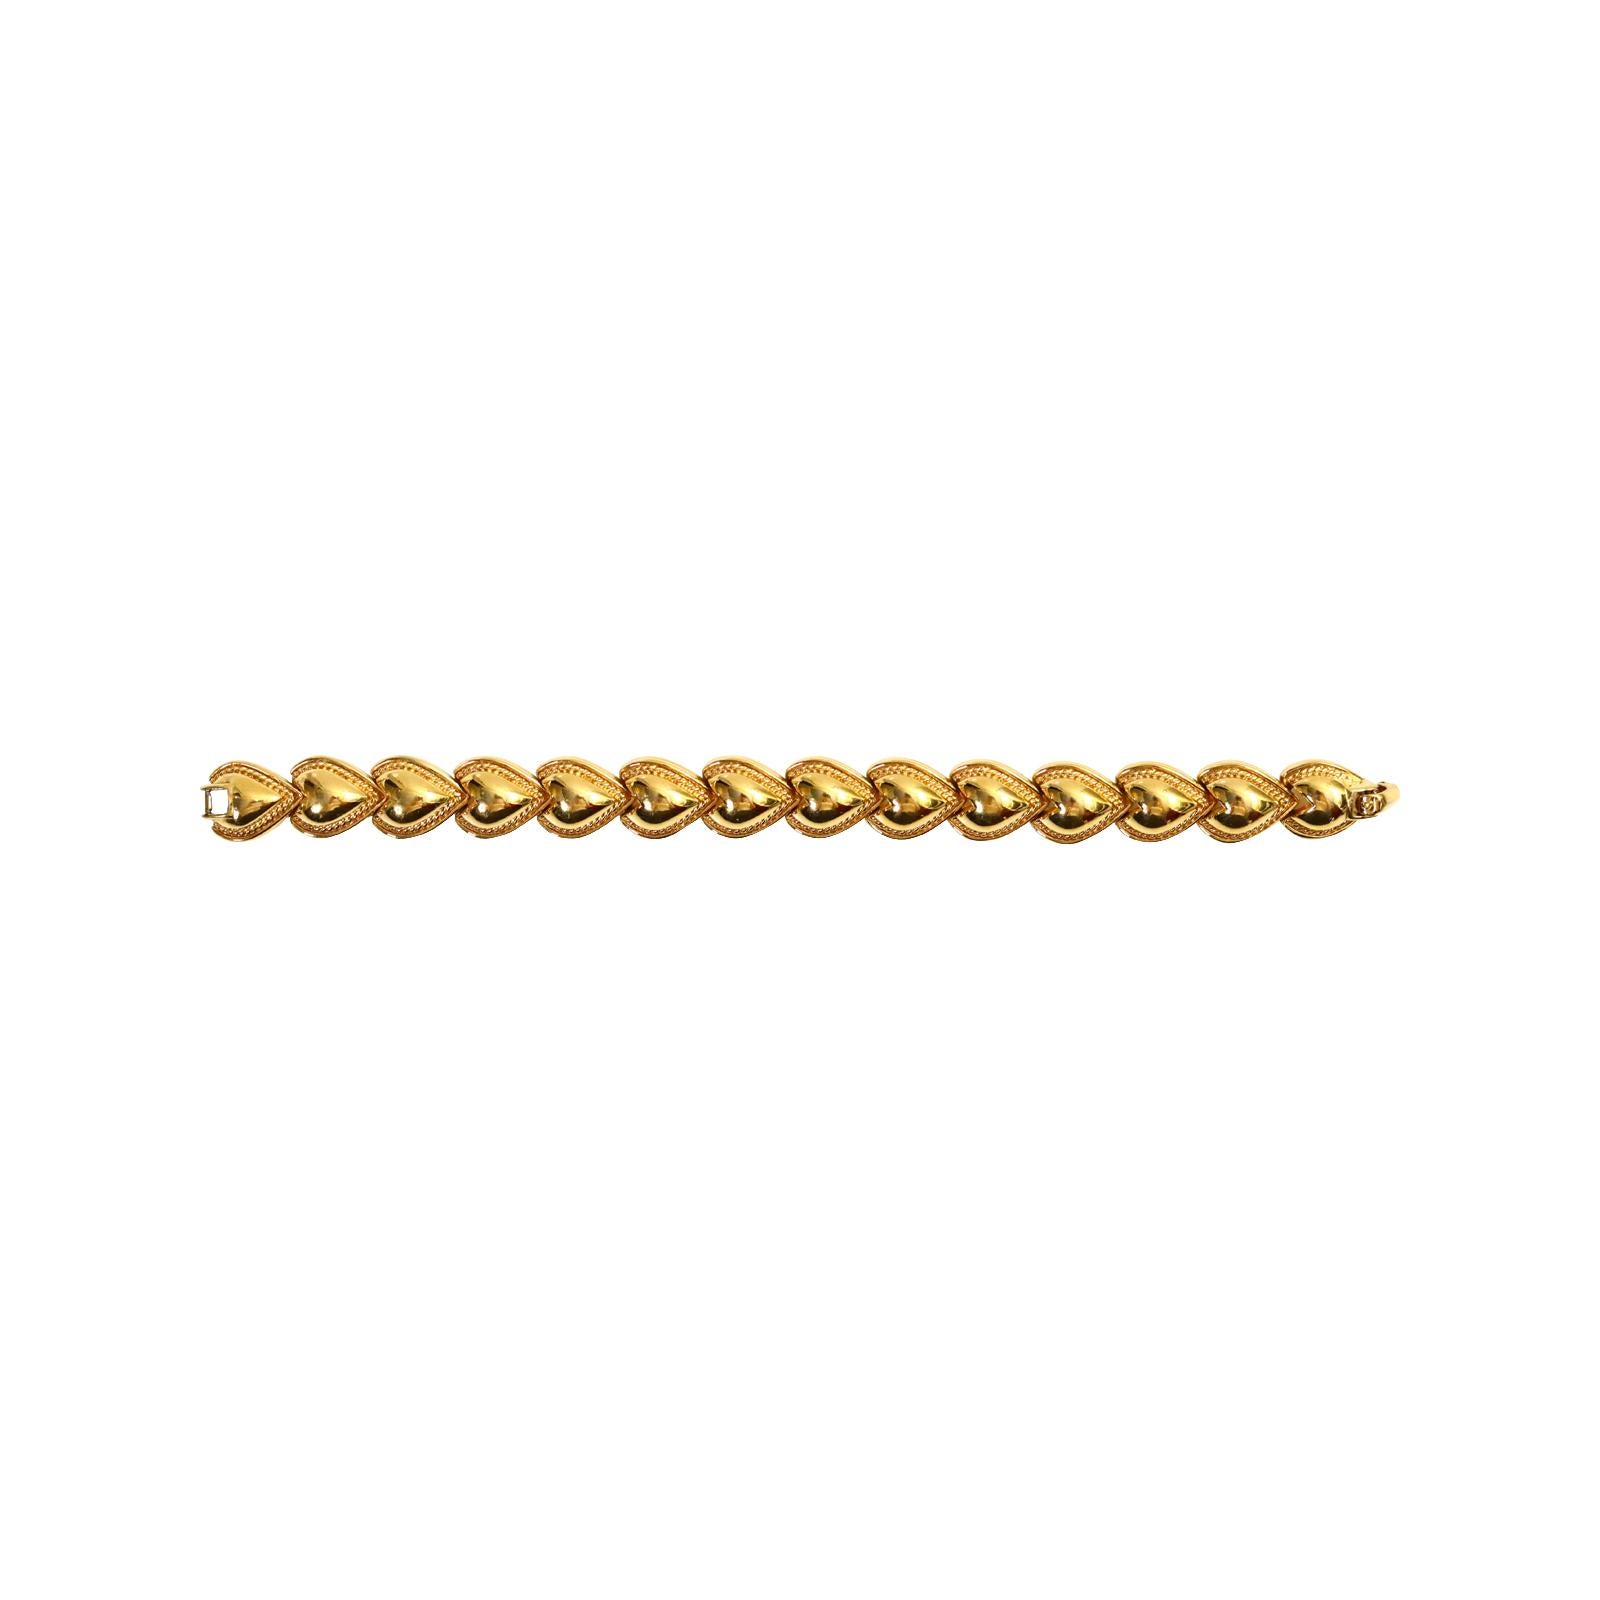 Vintage Nina Ricci Gold Links of Heart Bracelet Circa 1980s In Good Condition For Sale In New York, NY